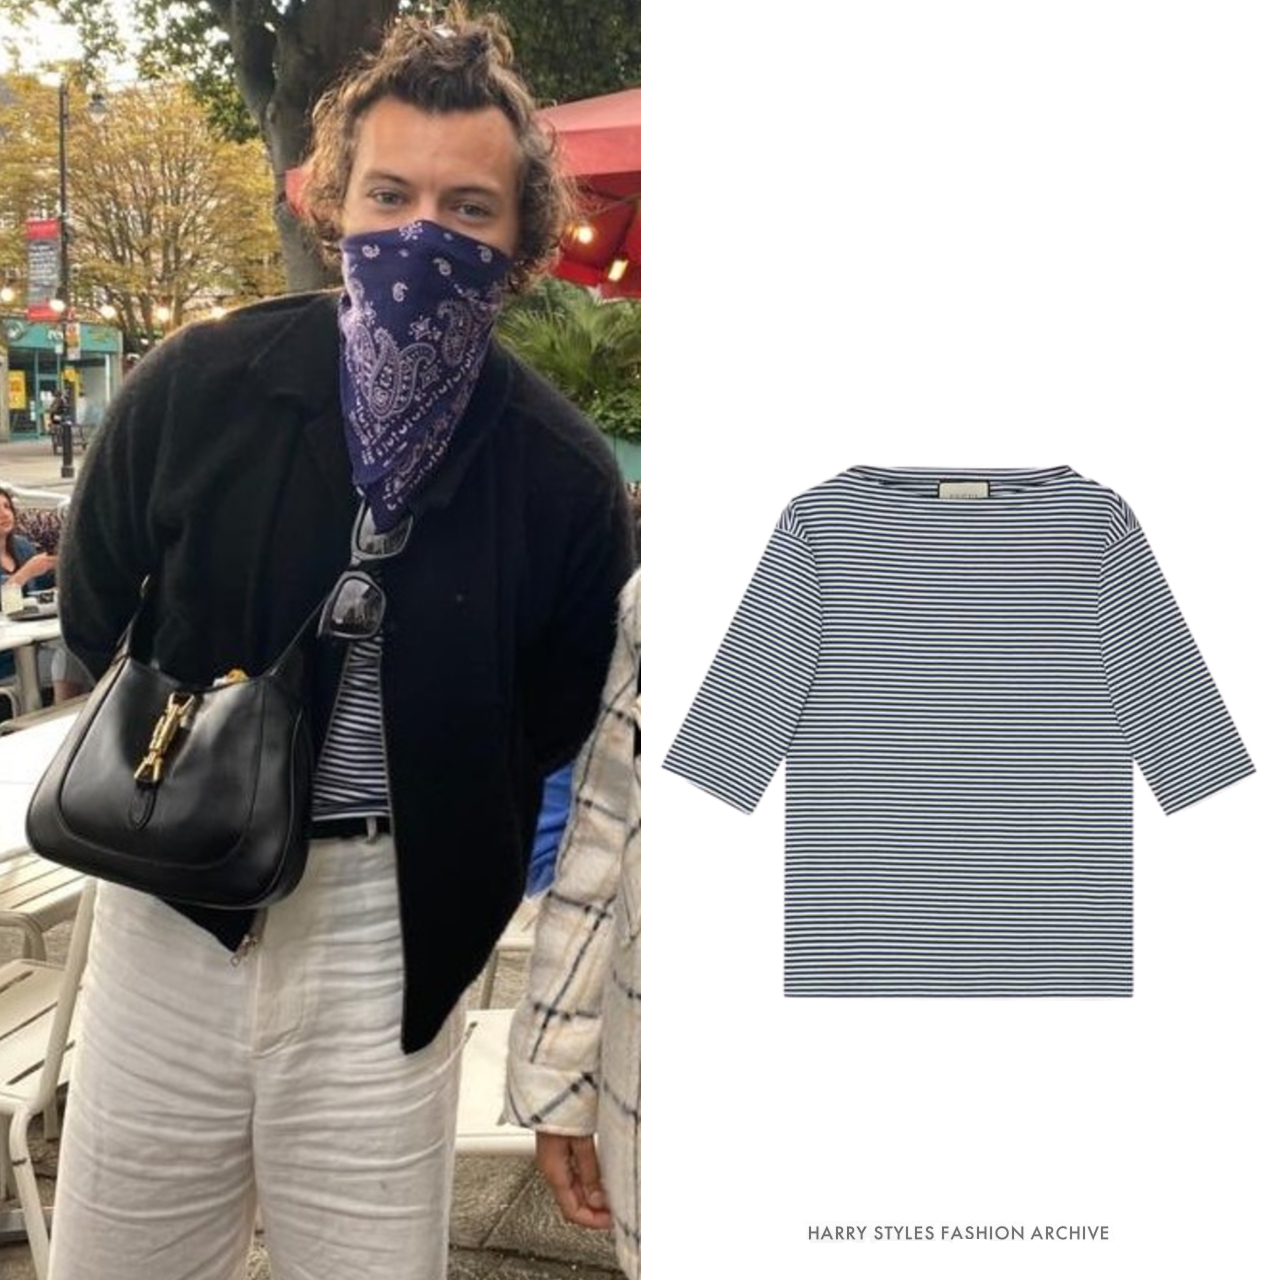 Harry Styles: A Warm and Stylish Look